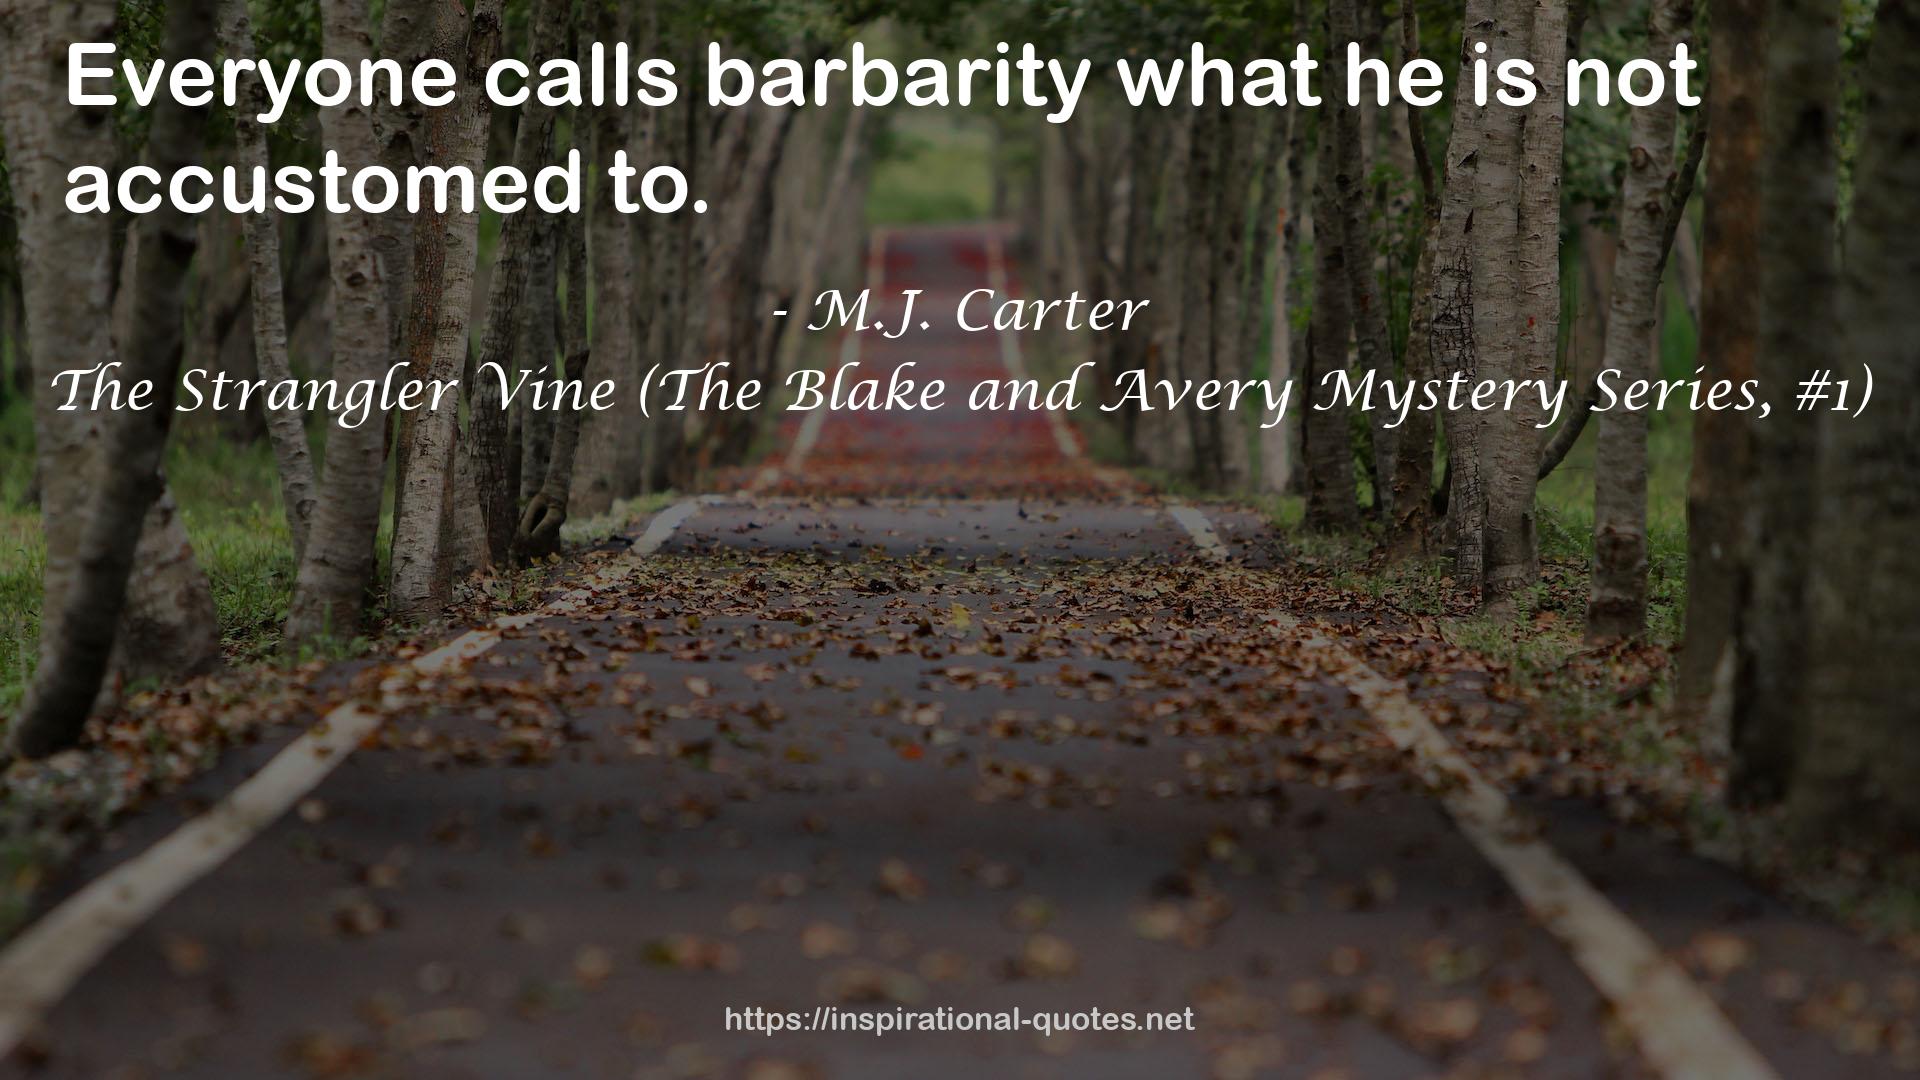 The Strangler Vine (The Blake and Avery Mystery Series, #1) QUOTES